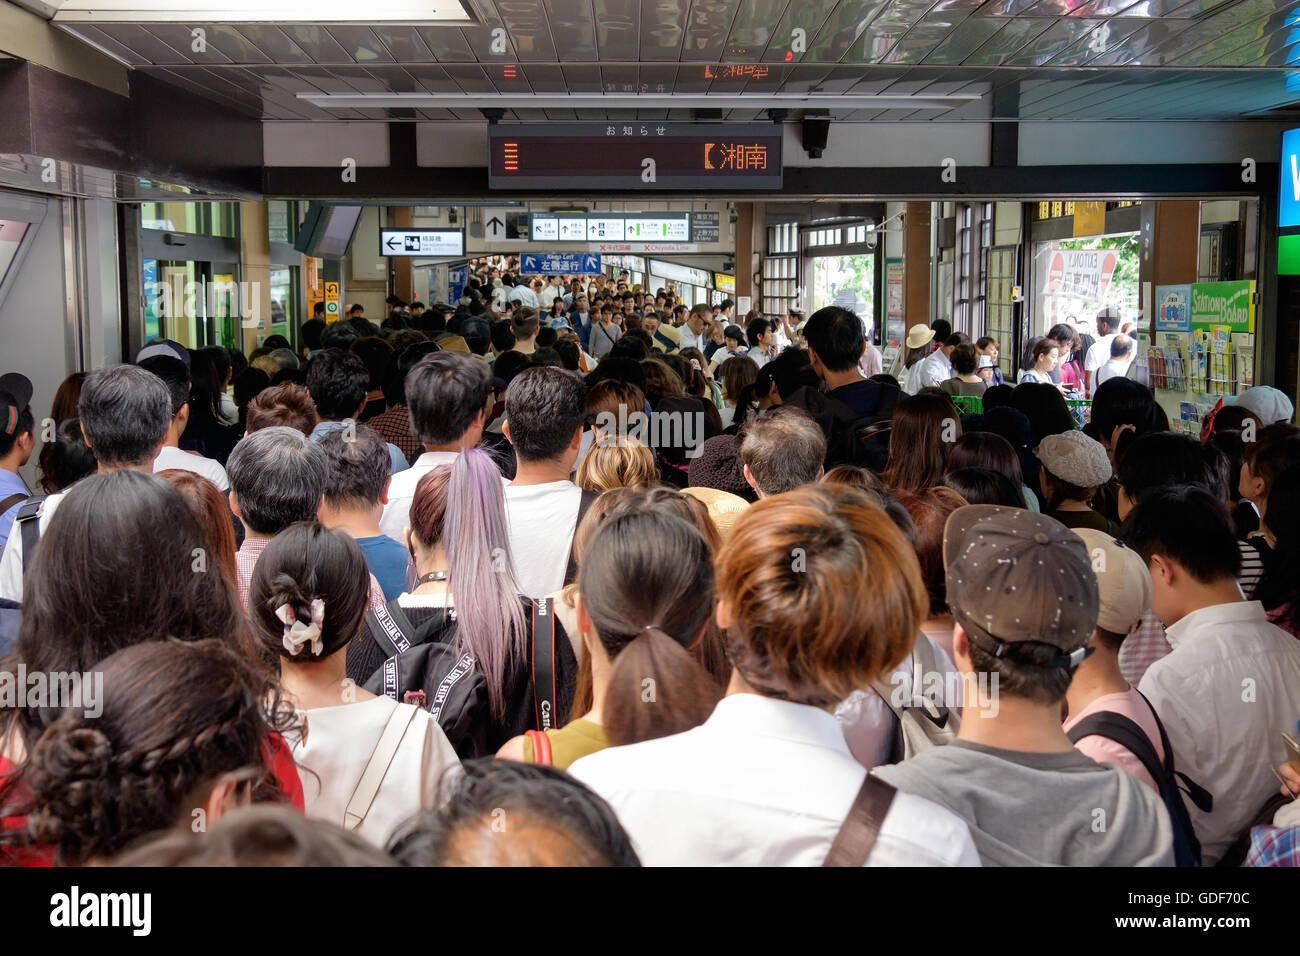 Crowds of people at a the Harajuku station on the Tokyo metro railway, Japan. Stock Photo